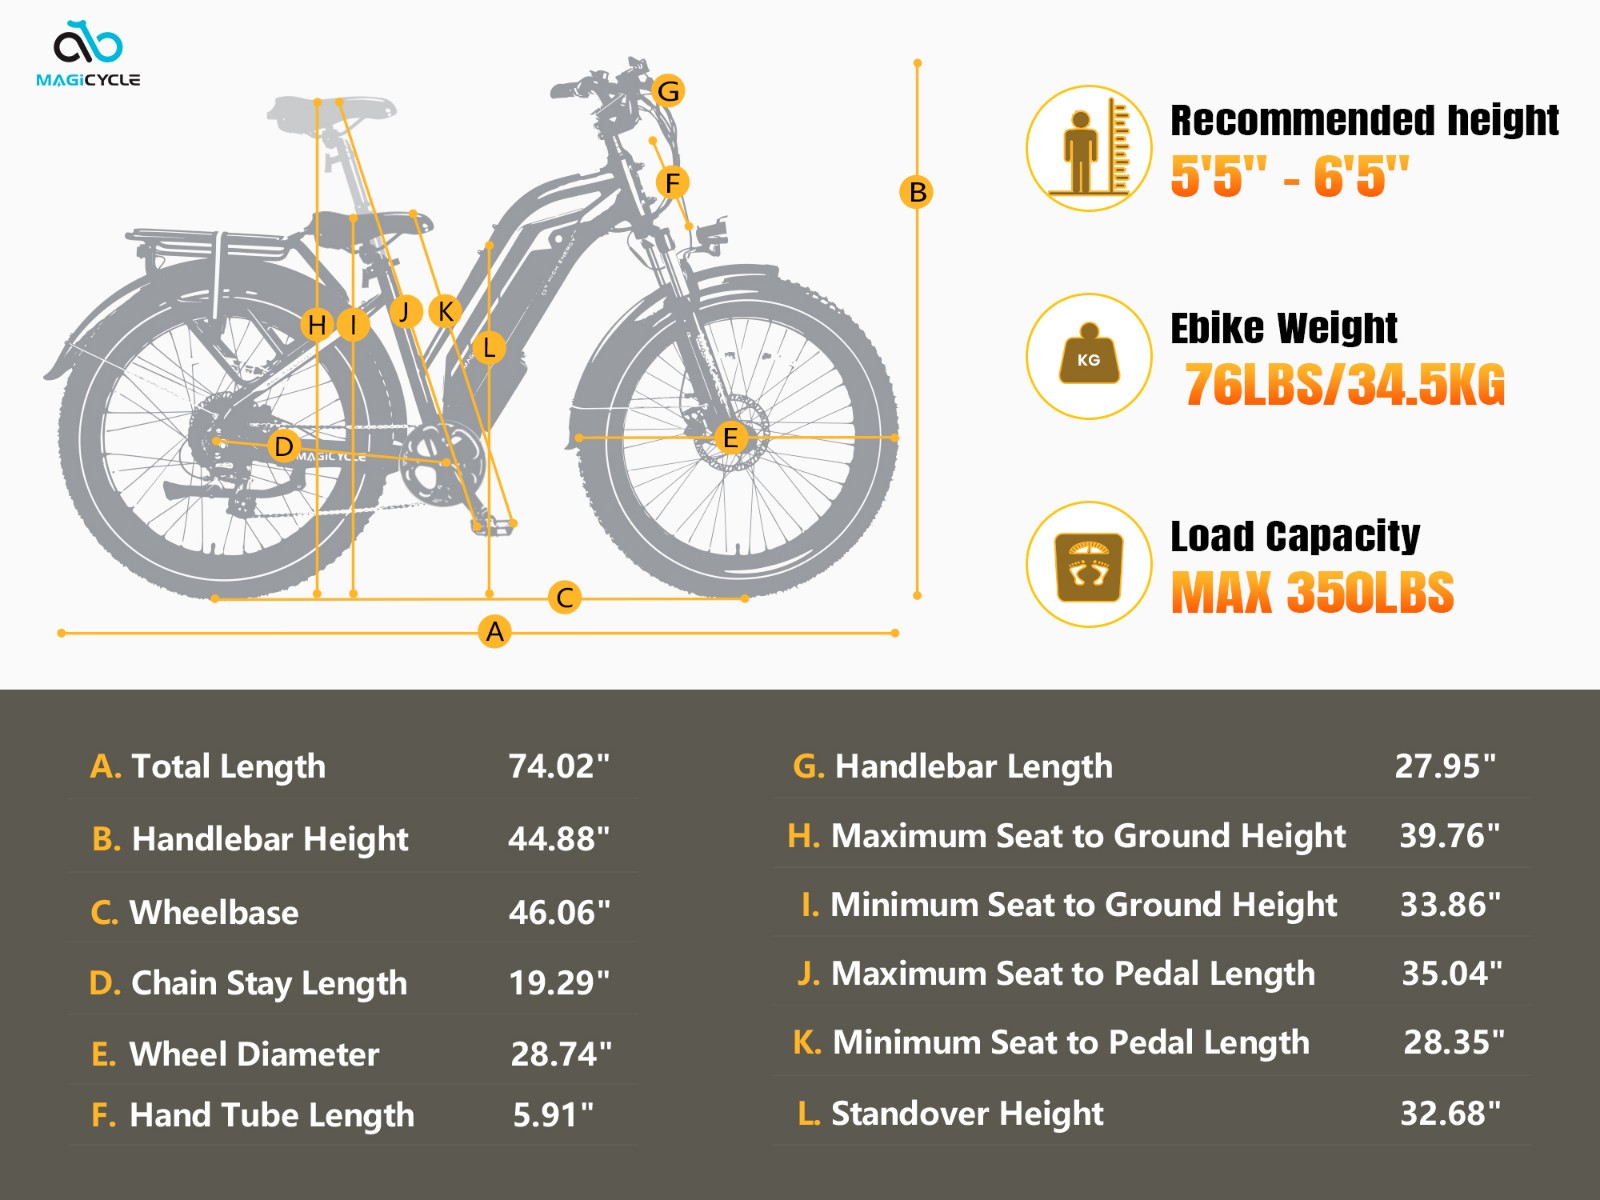 MAGICYCLE Ebike Deals